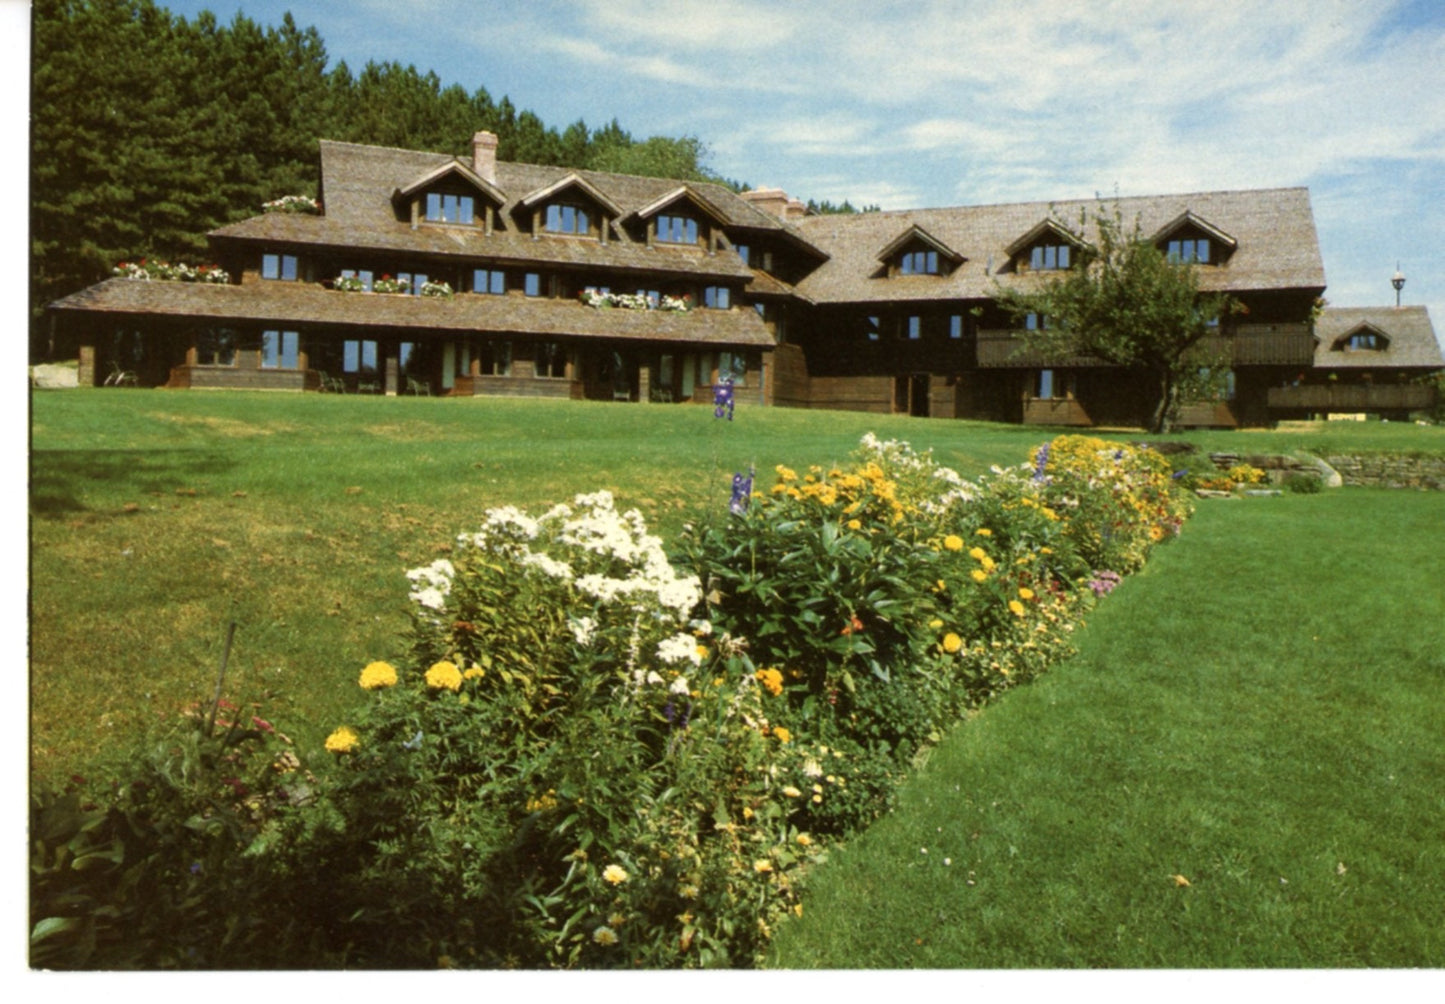 Trapp Family Lodge and Guest Houses STOWE VERMONT Photo of Lodge and Flower Beds Large Postcard 6" x 4"